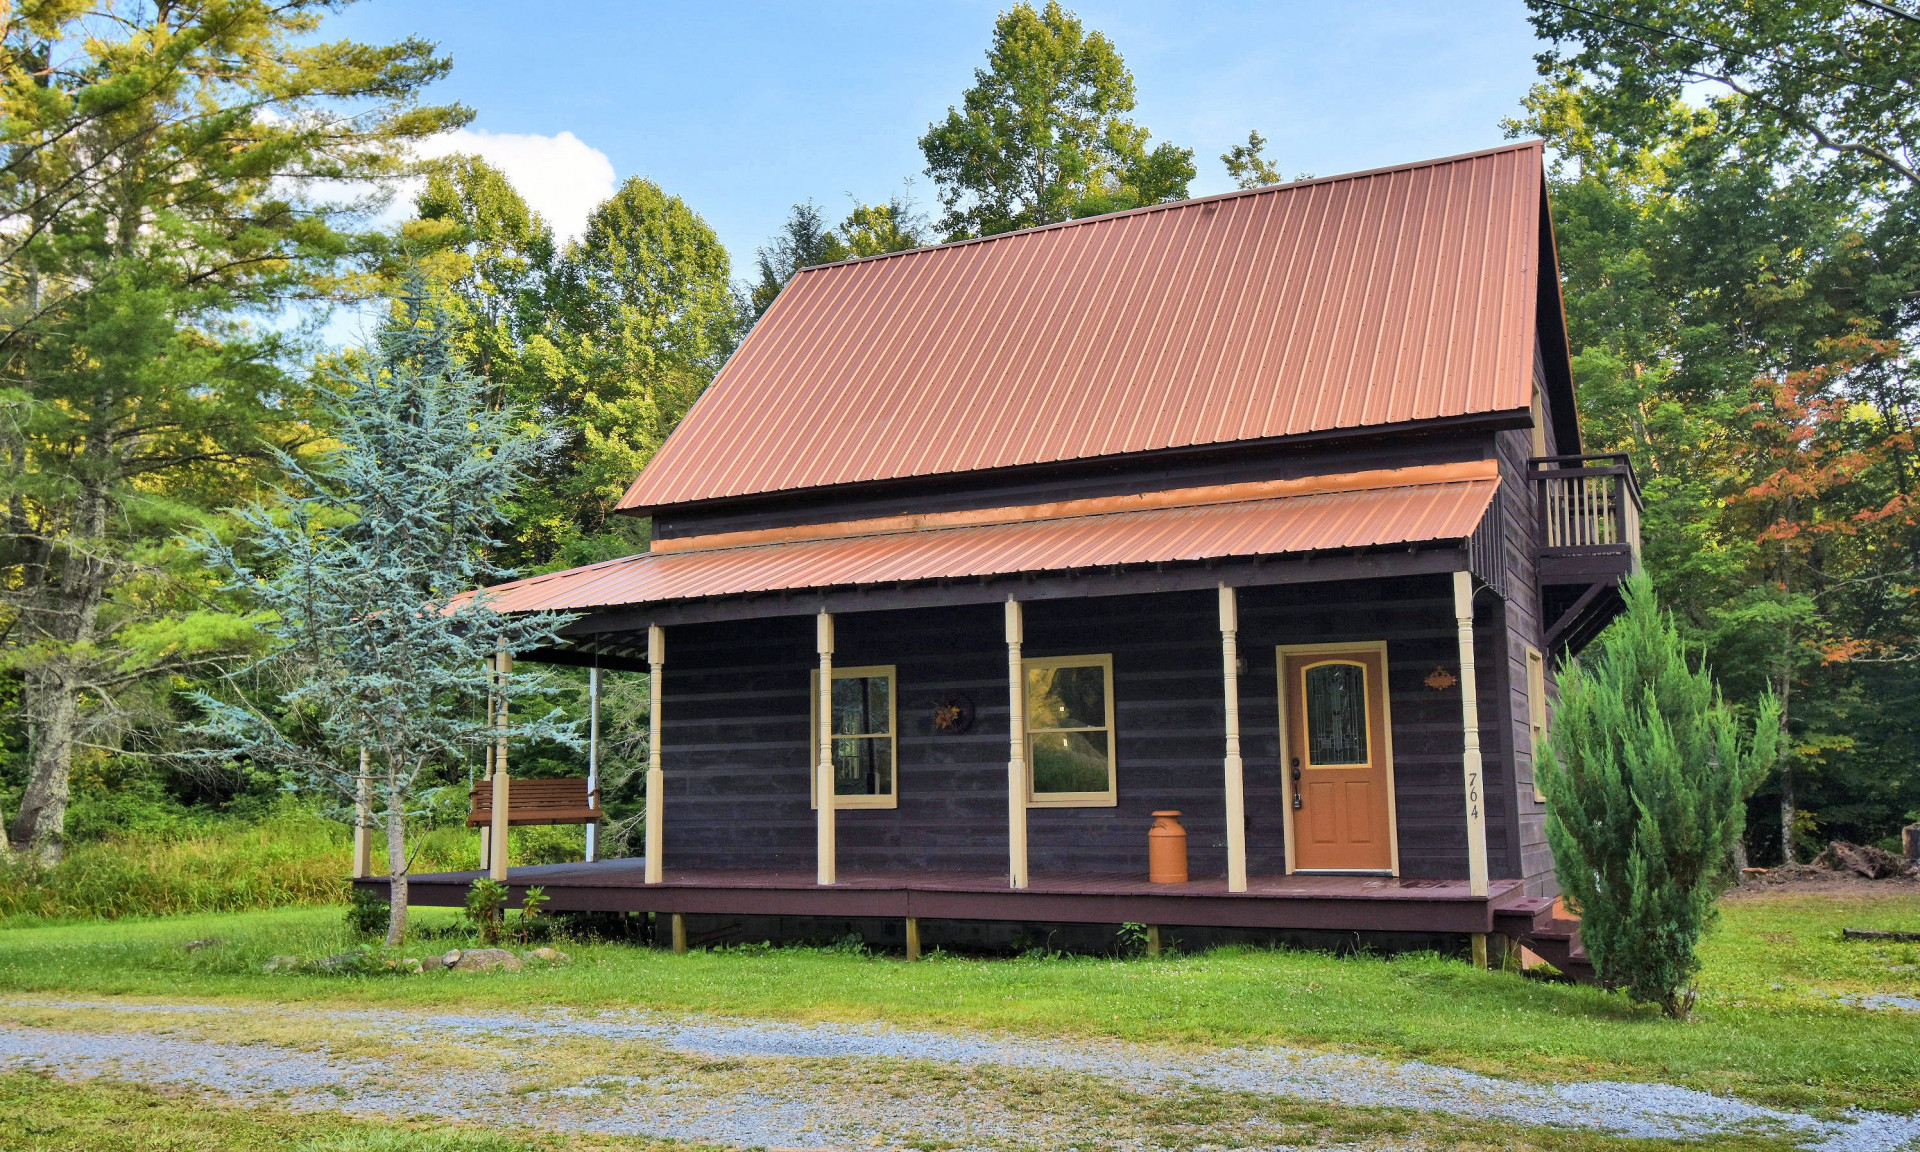 Enjoy all amenities of Laurel Creek and the Damascus area with this sweet mountain cabin offering easy access and frontage on Whitetop Laurel Creek.